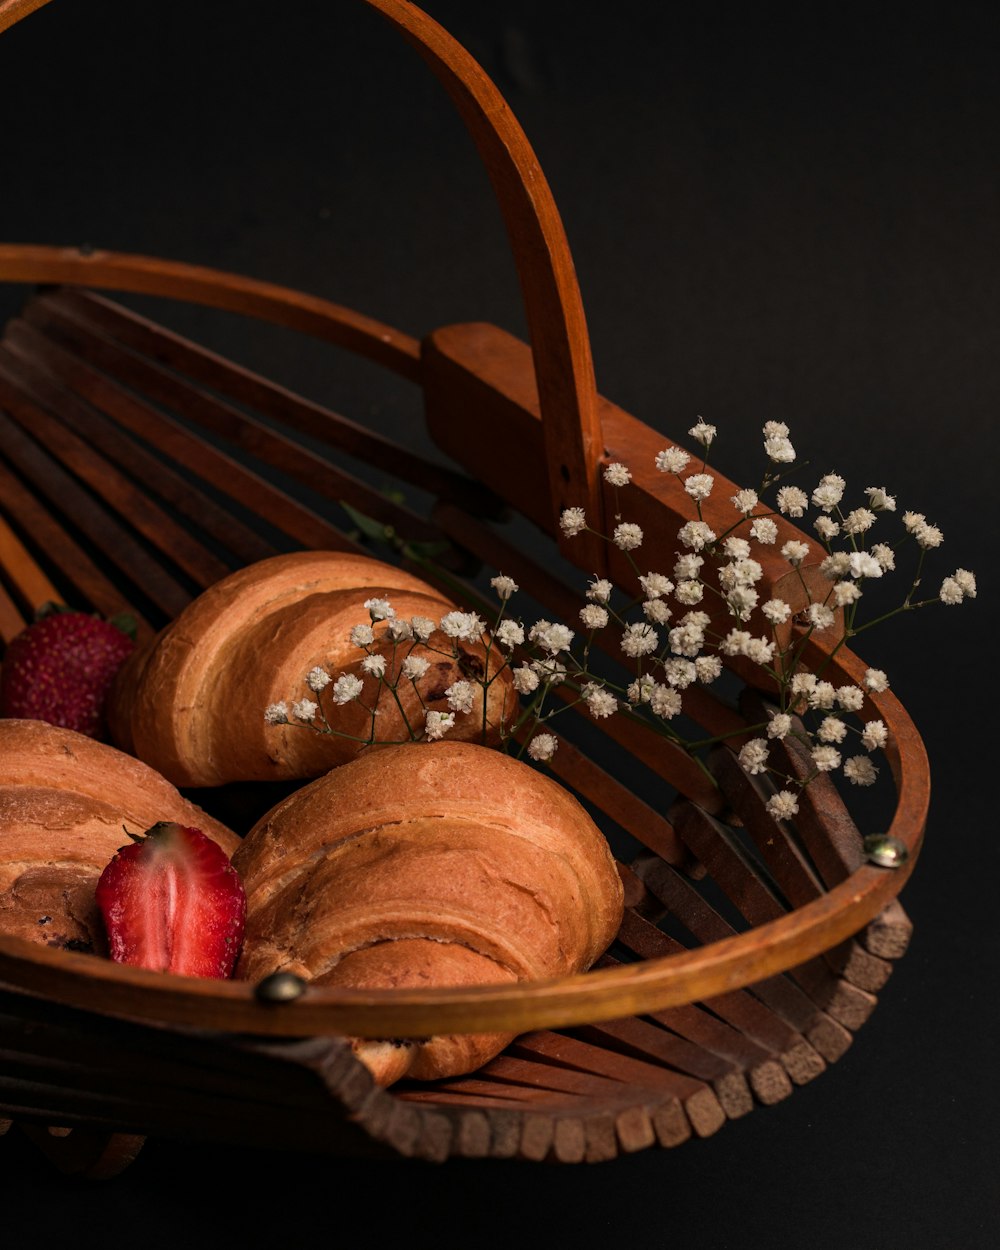 brown wooden basket with red and brown round fruits